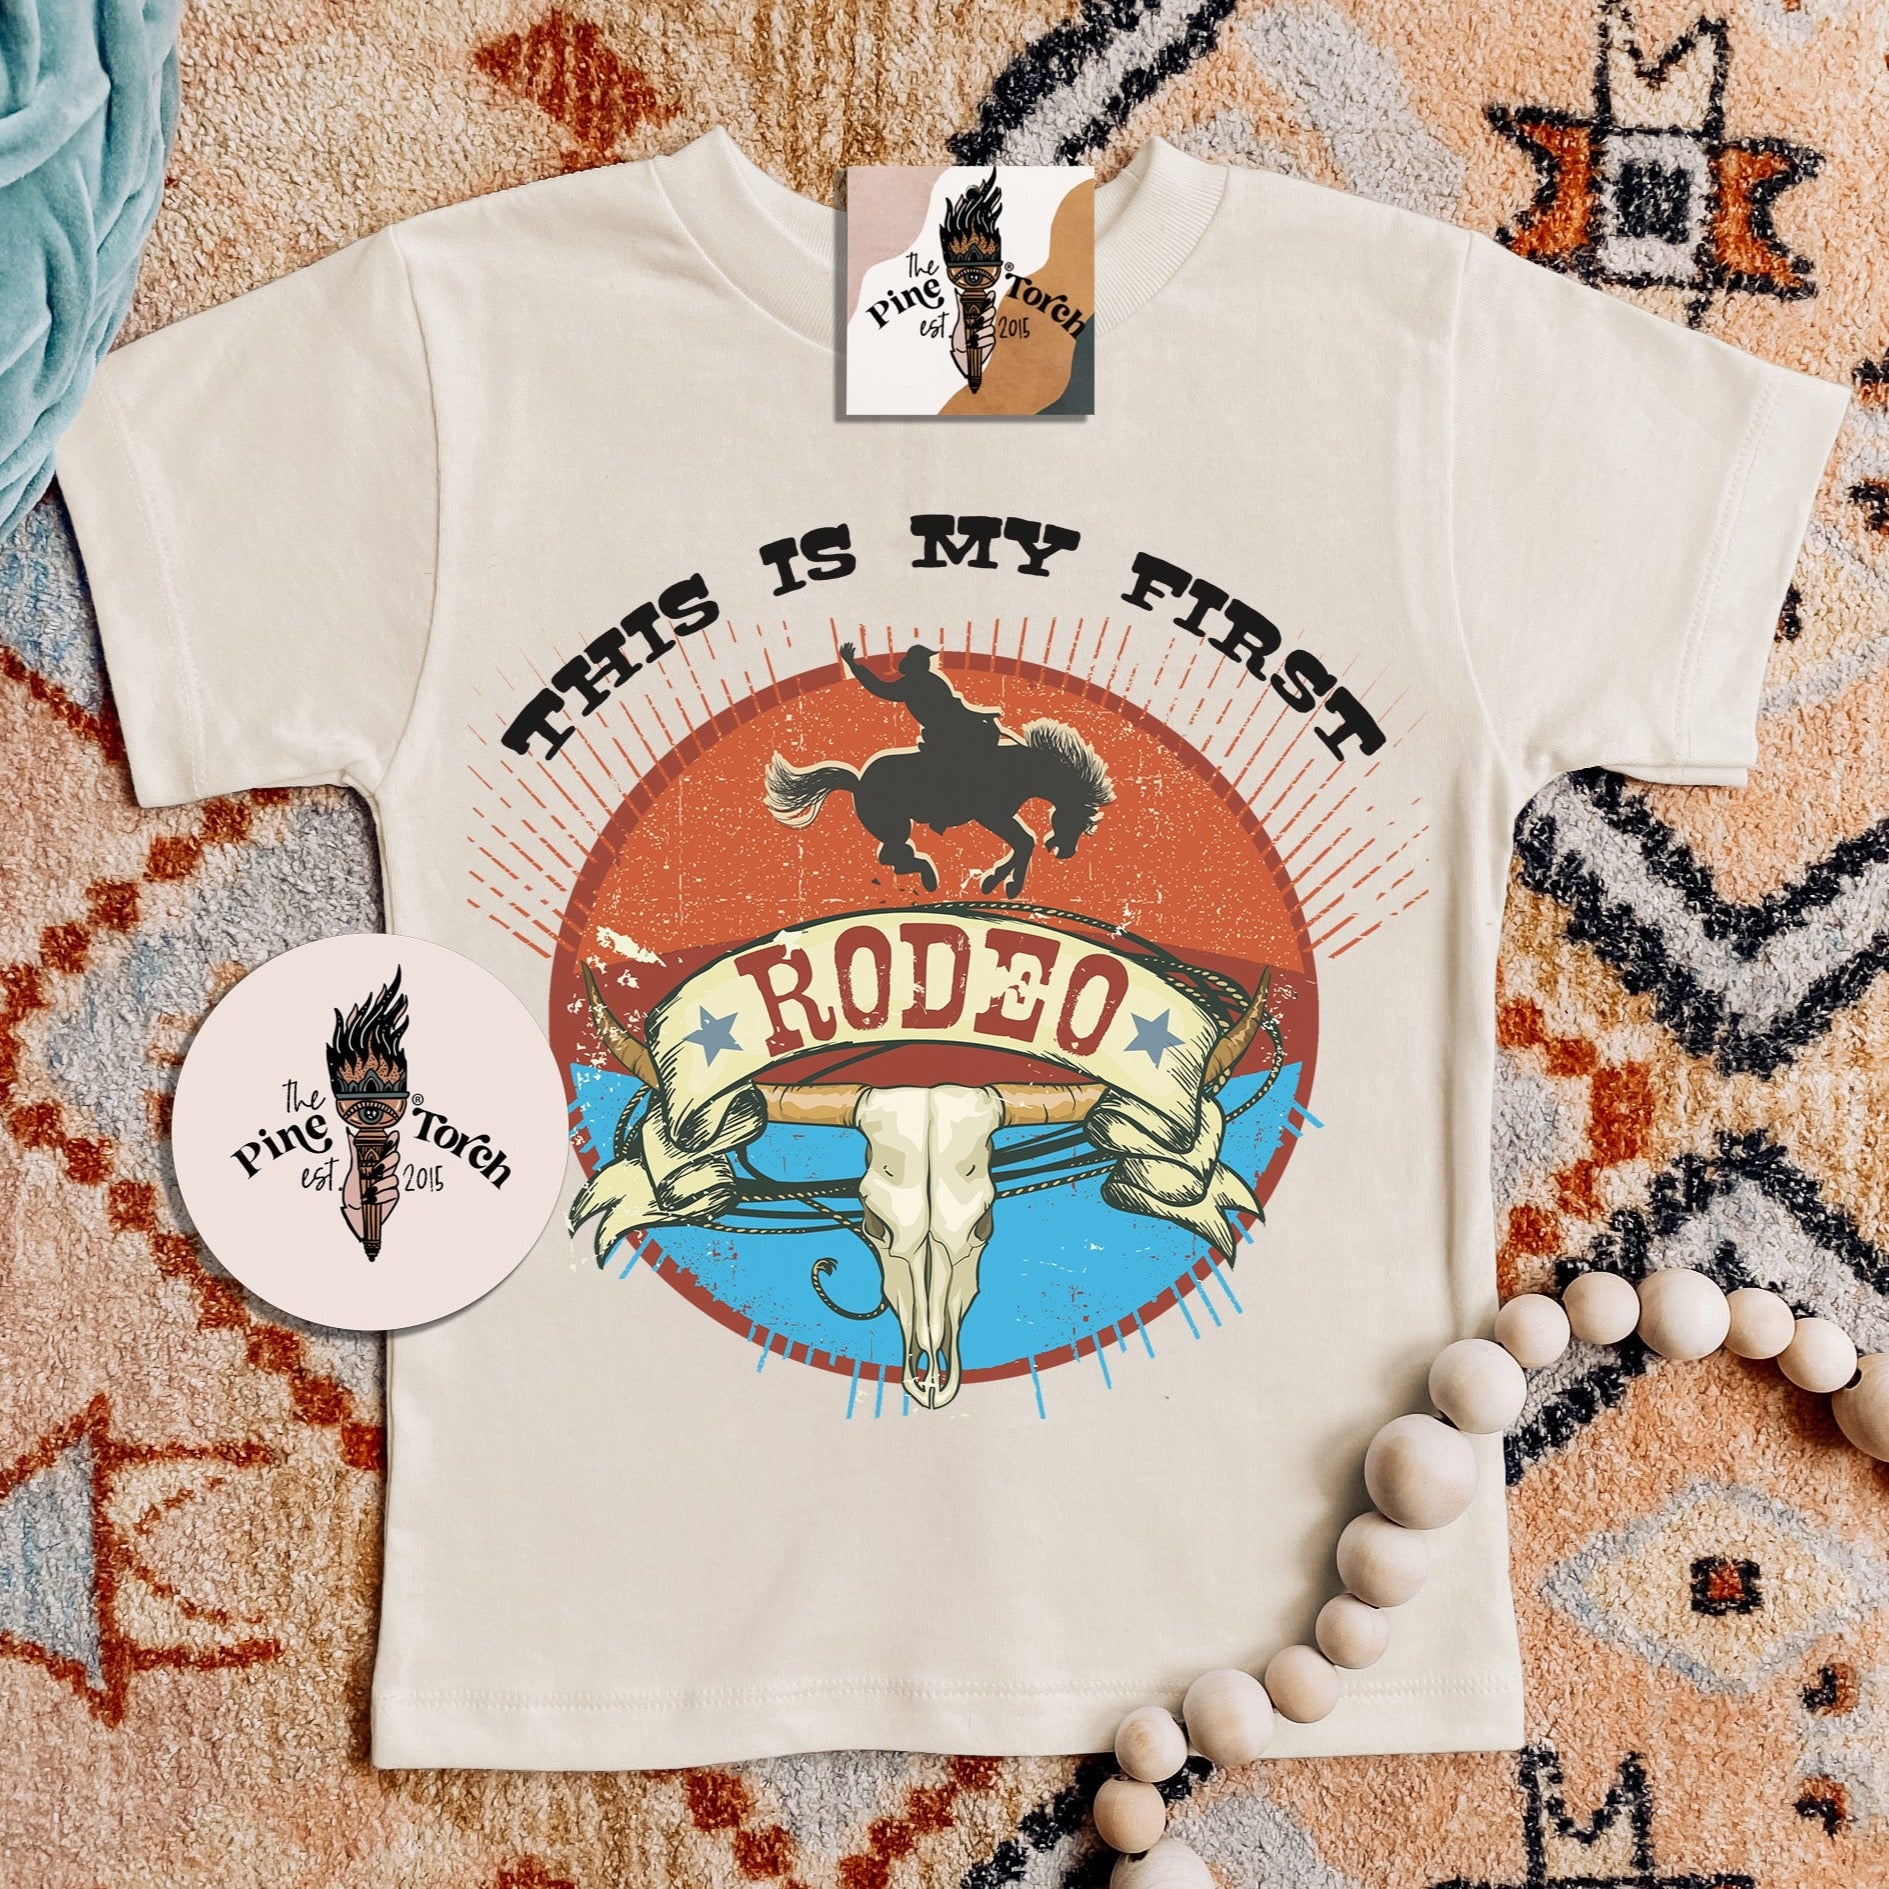 « THIS IS MY FIRST RODEO » KID'S TEE